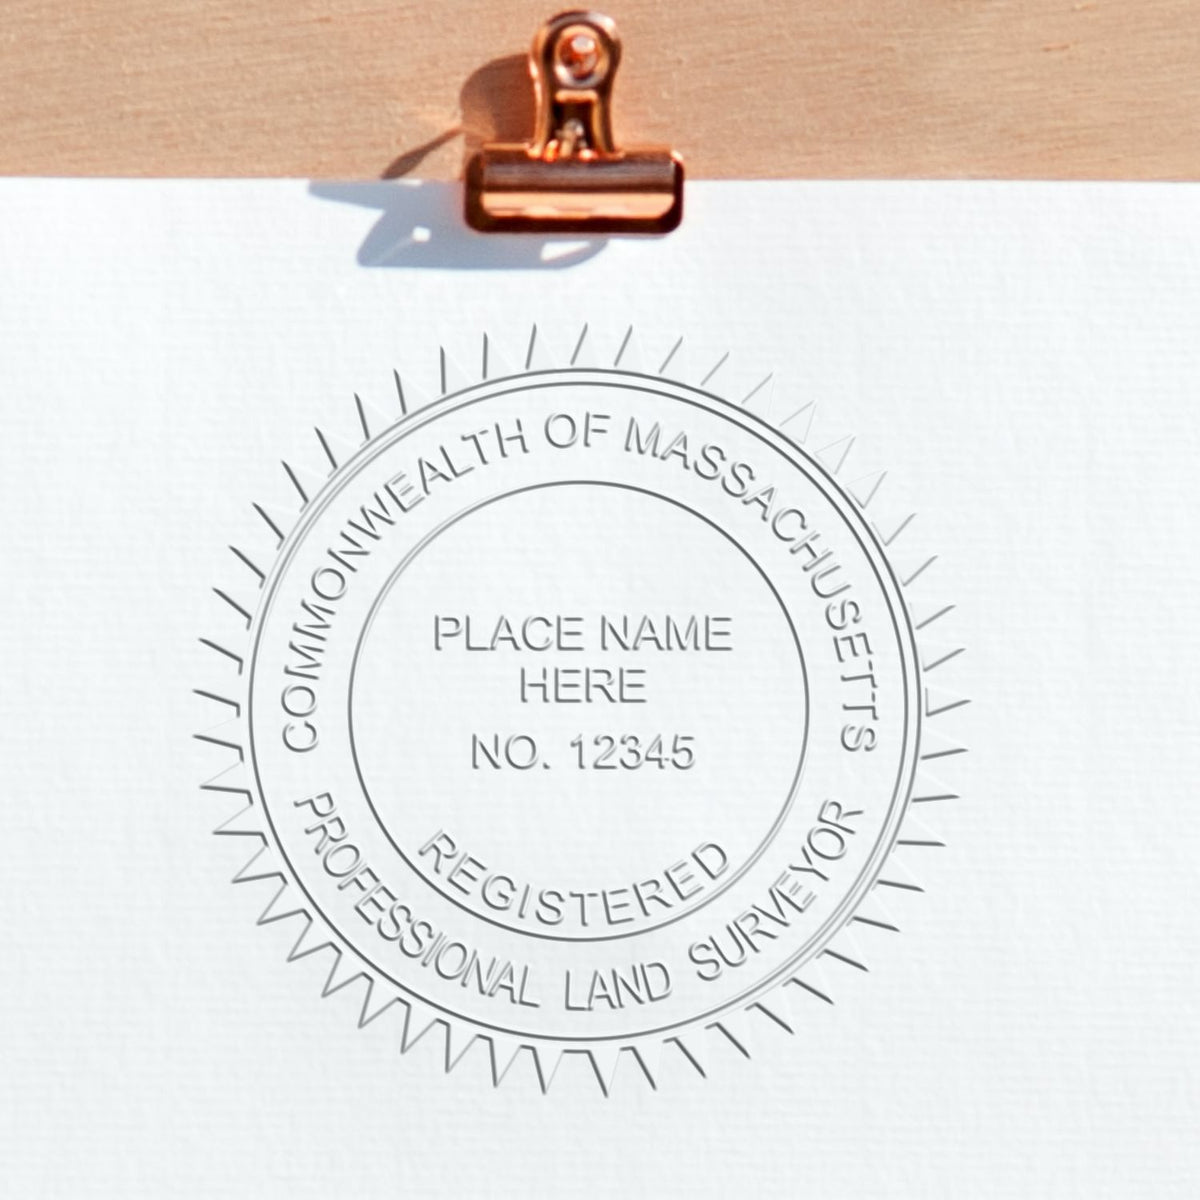 The Long Reach Massachusetts Land Surveyor Seal stamp impression comes to life with a crisp, detailed photo on paper - showcasing true professional quality.